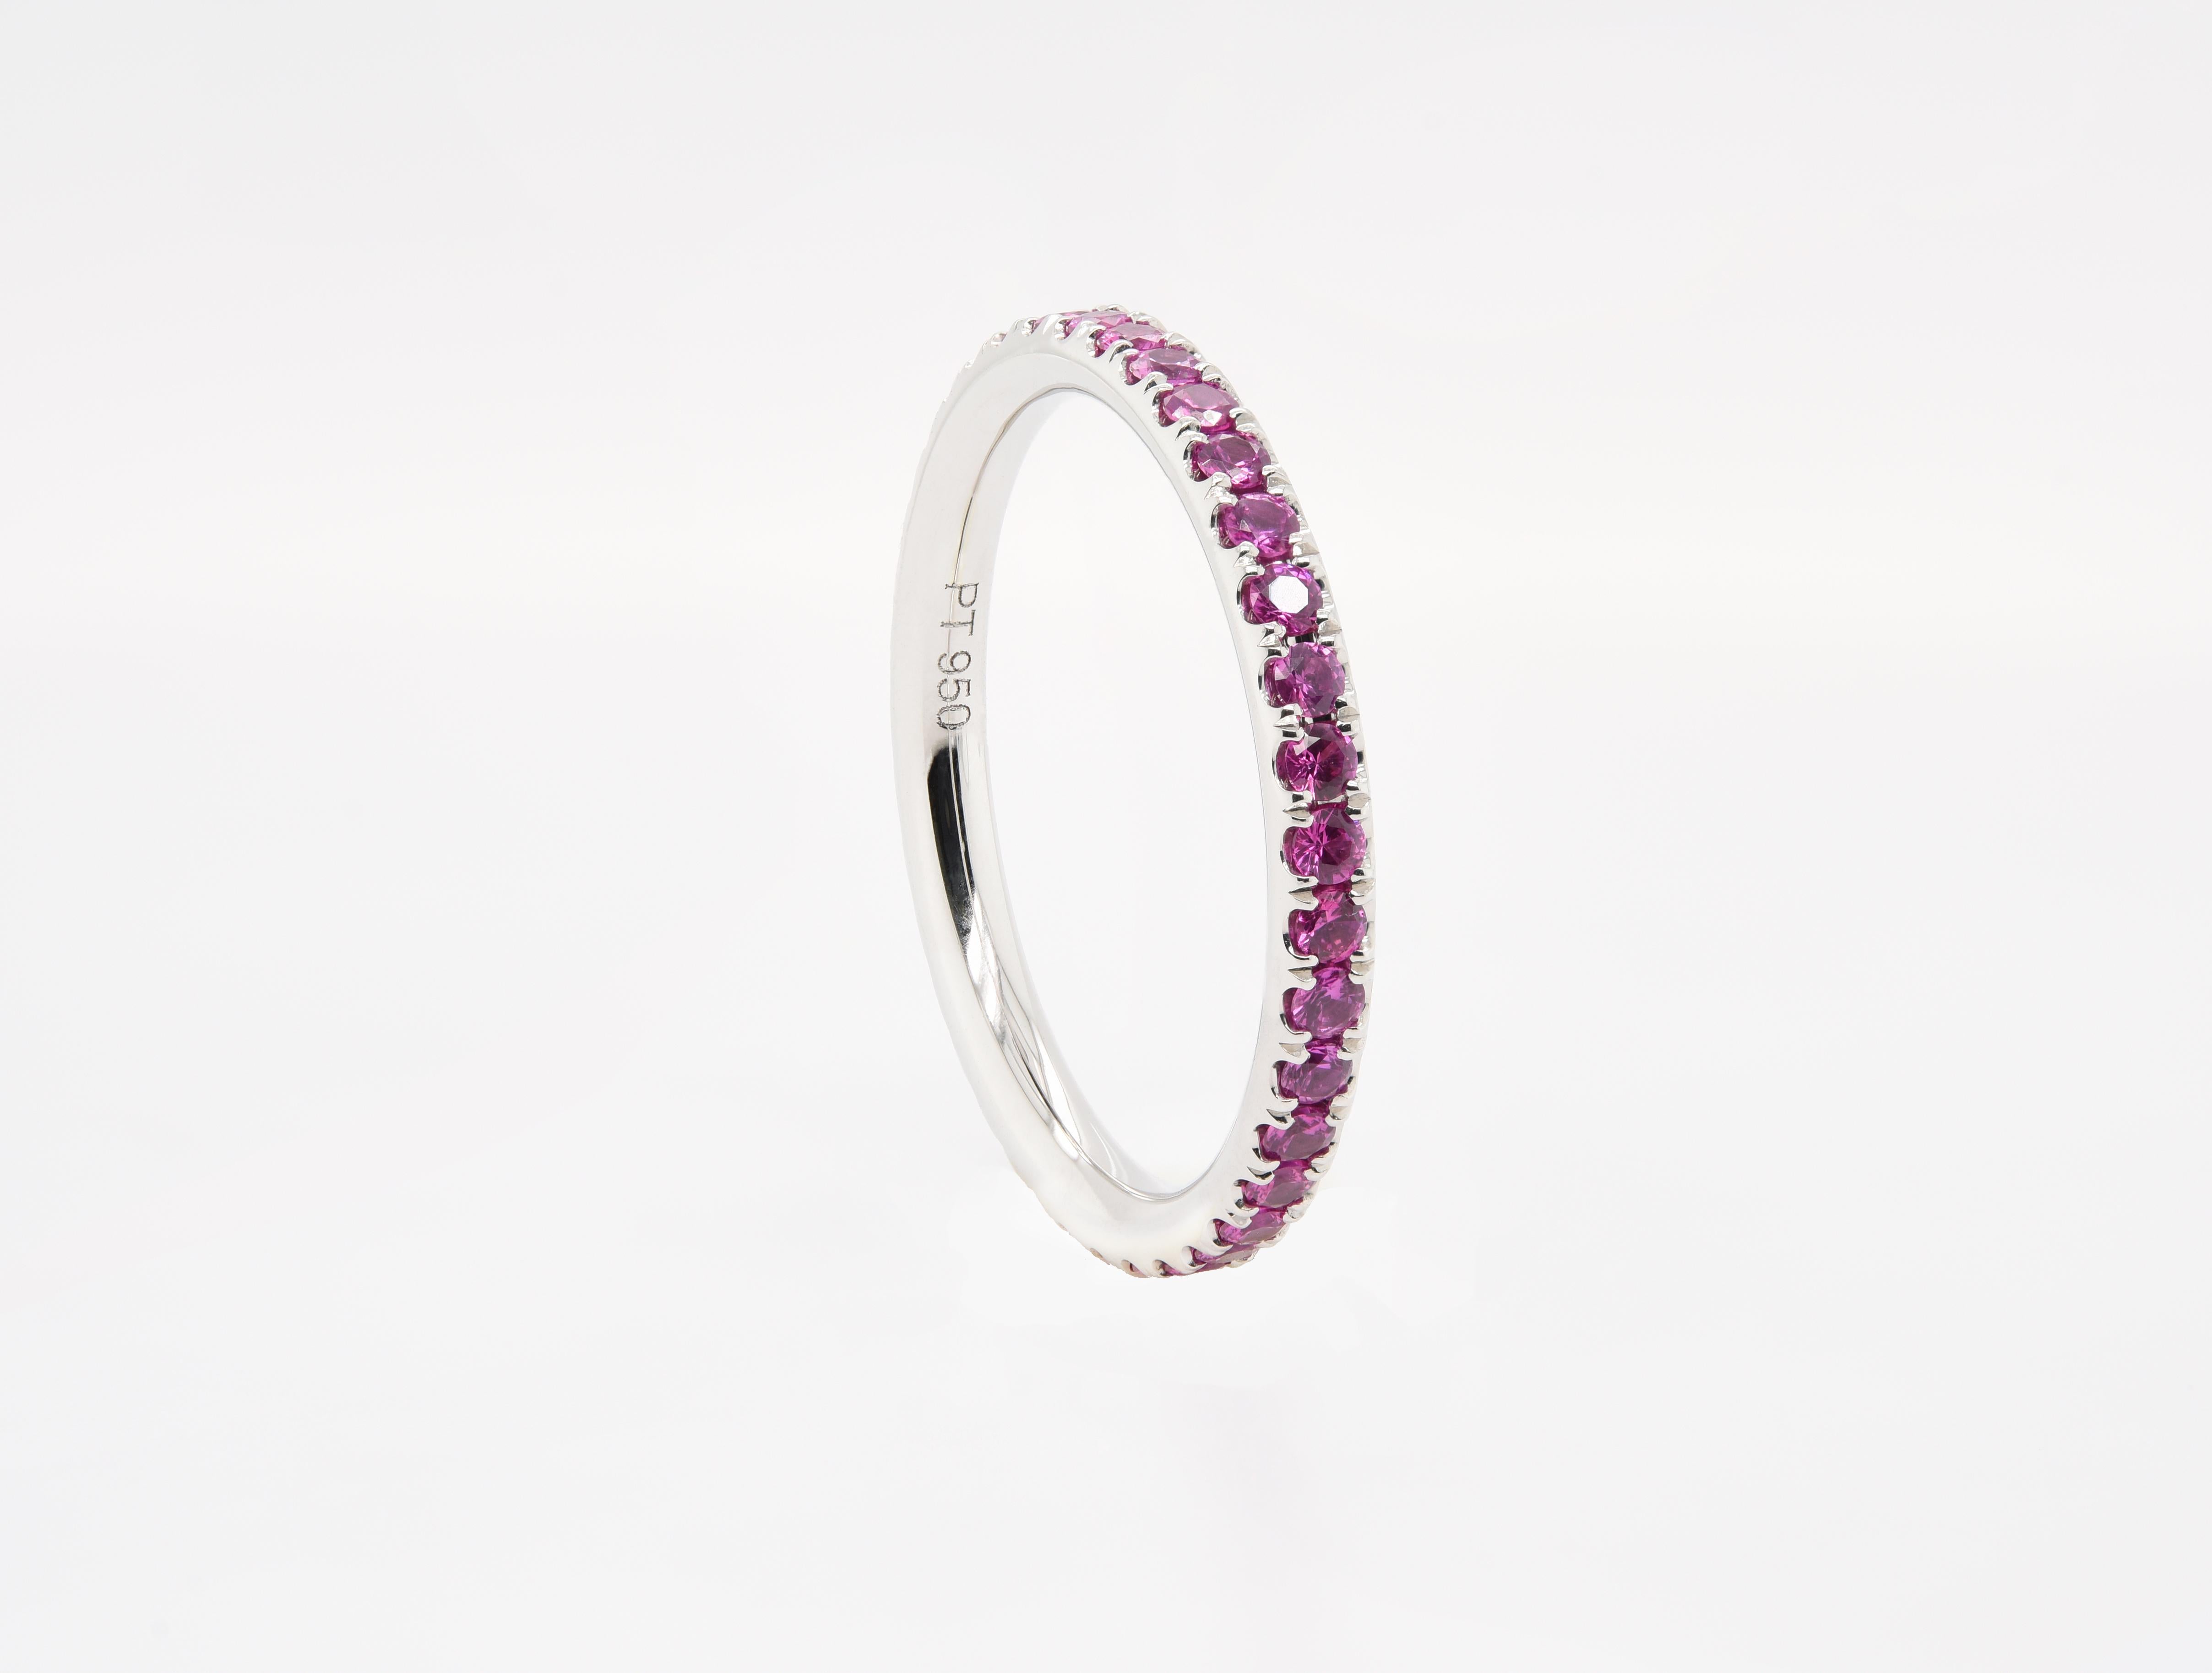 JAG New York Eternity Band with Your Choice of Diamonds and Gemstones For Sale 4